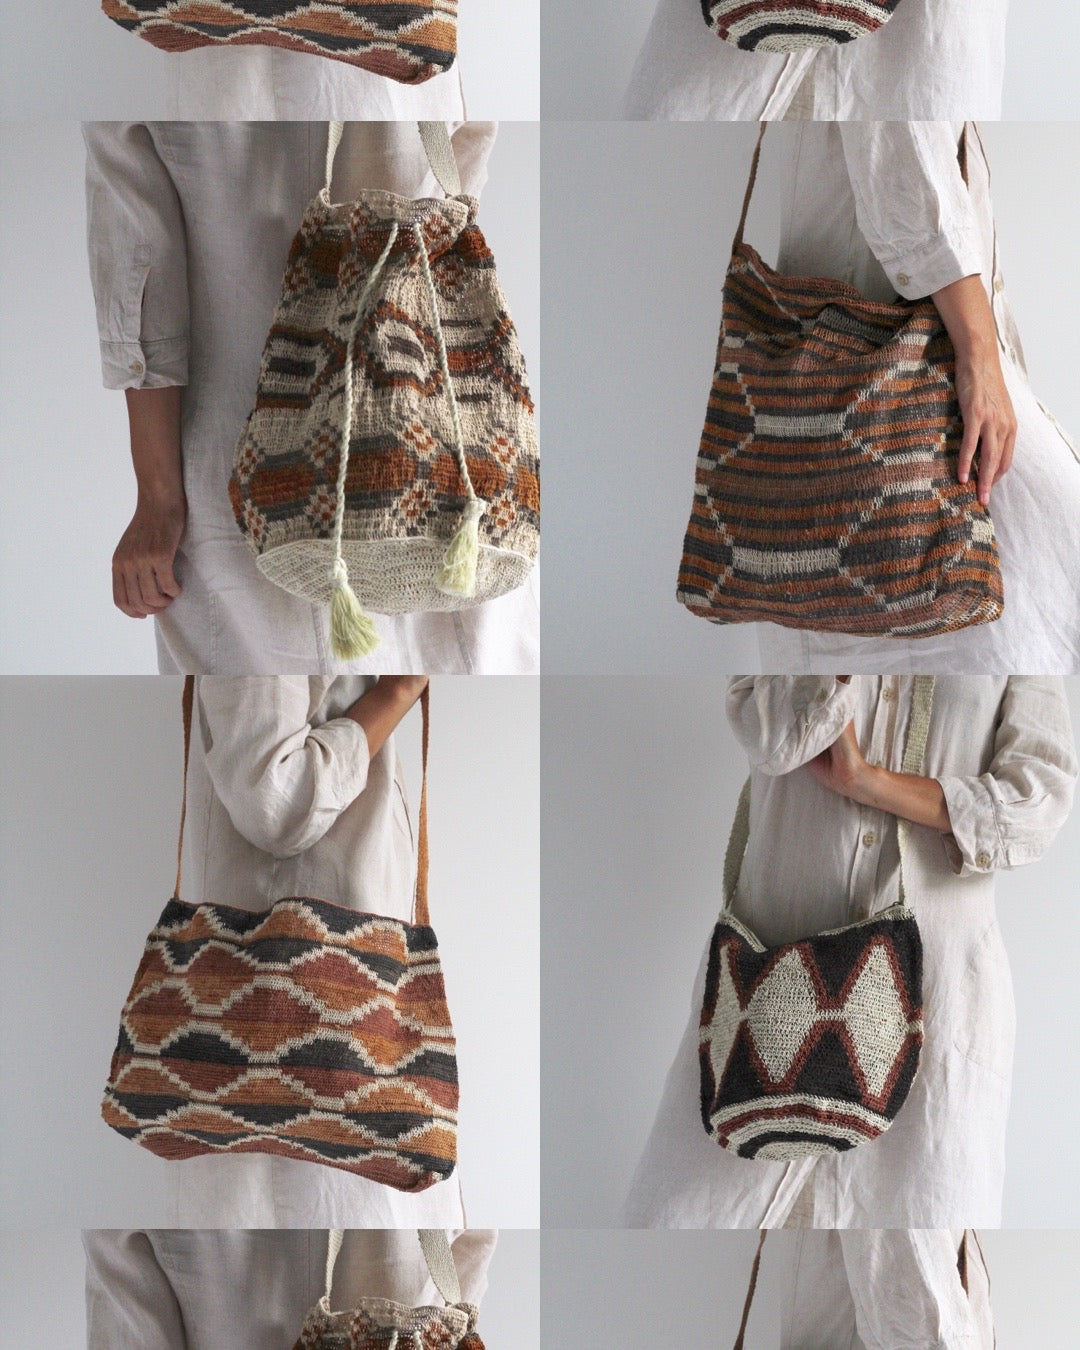 Our Diary | Our Woven Bags, Preserving Ancestral Traditions